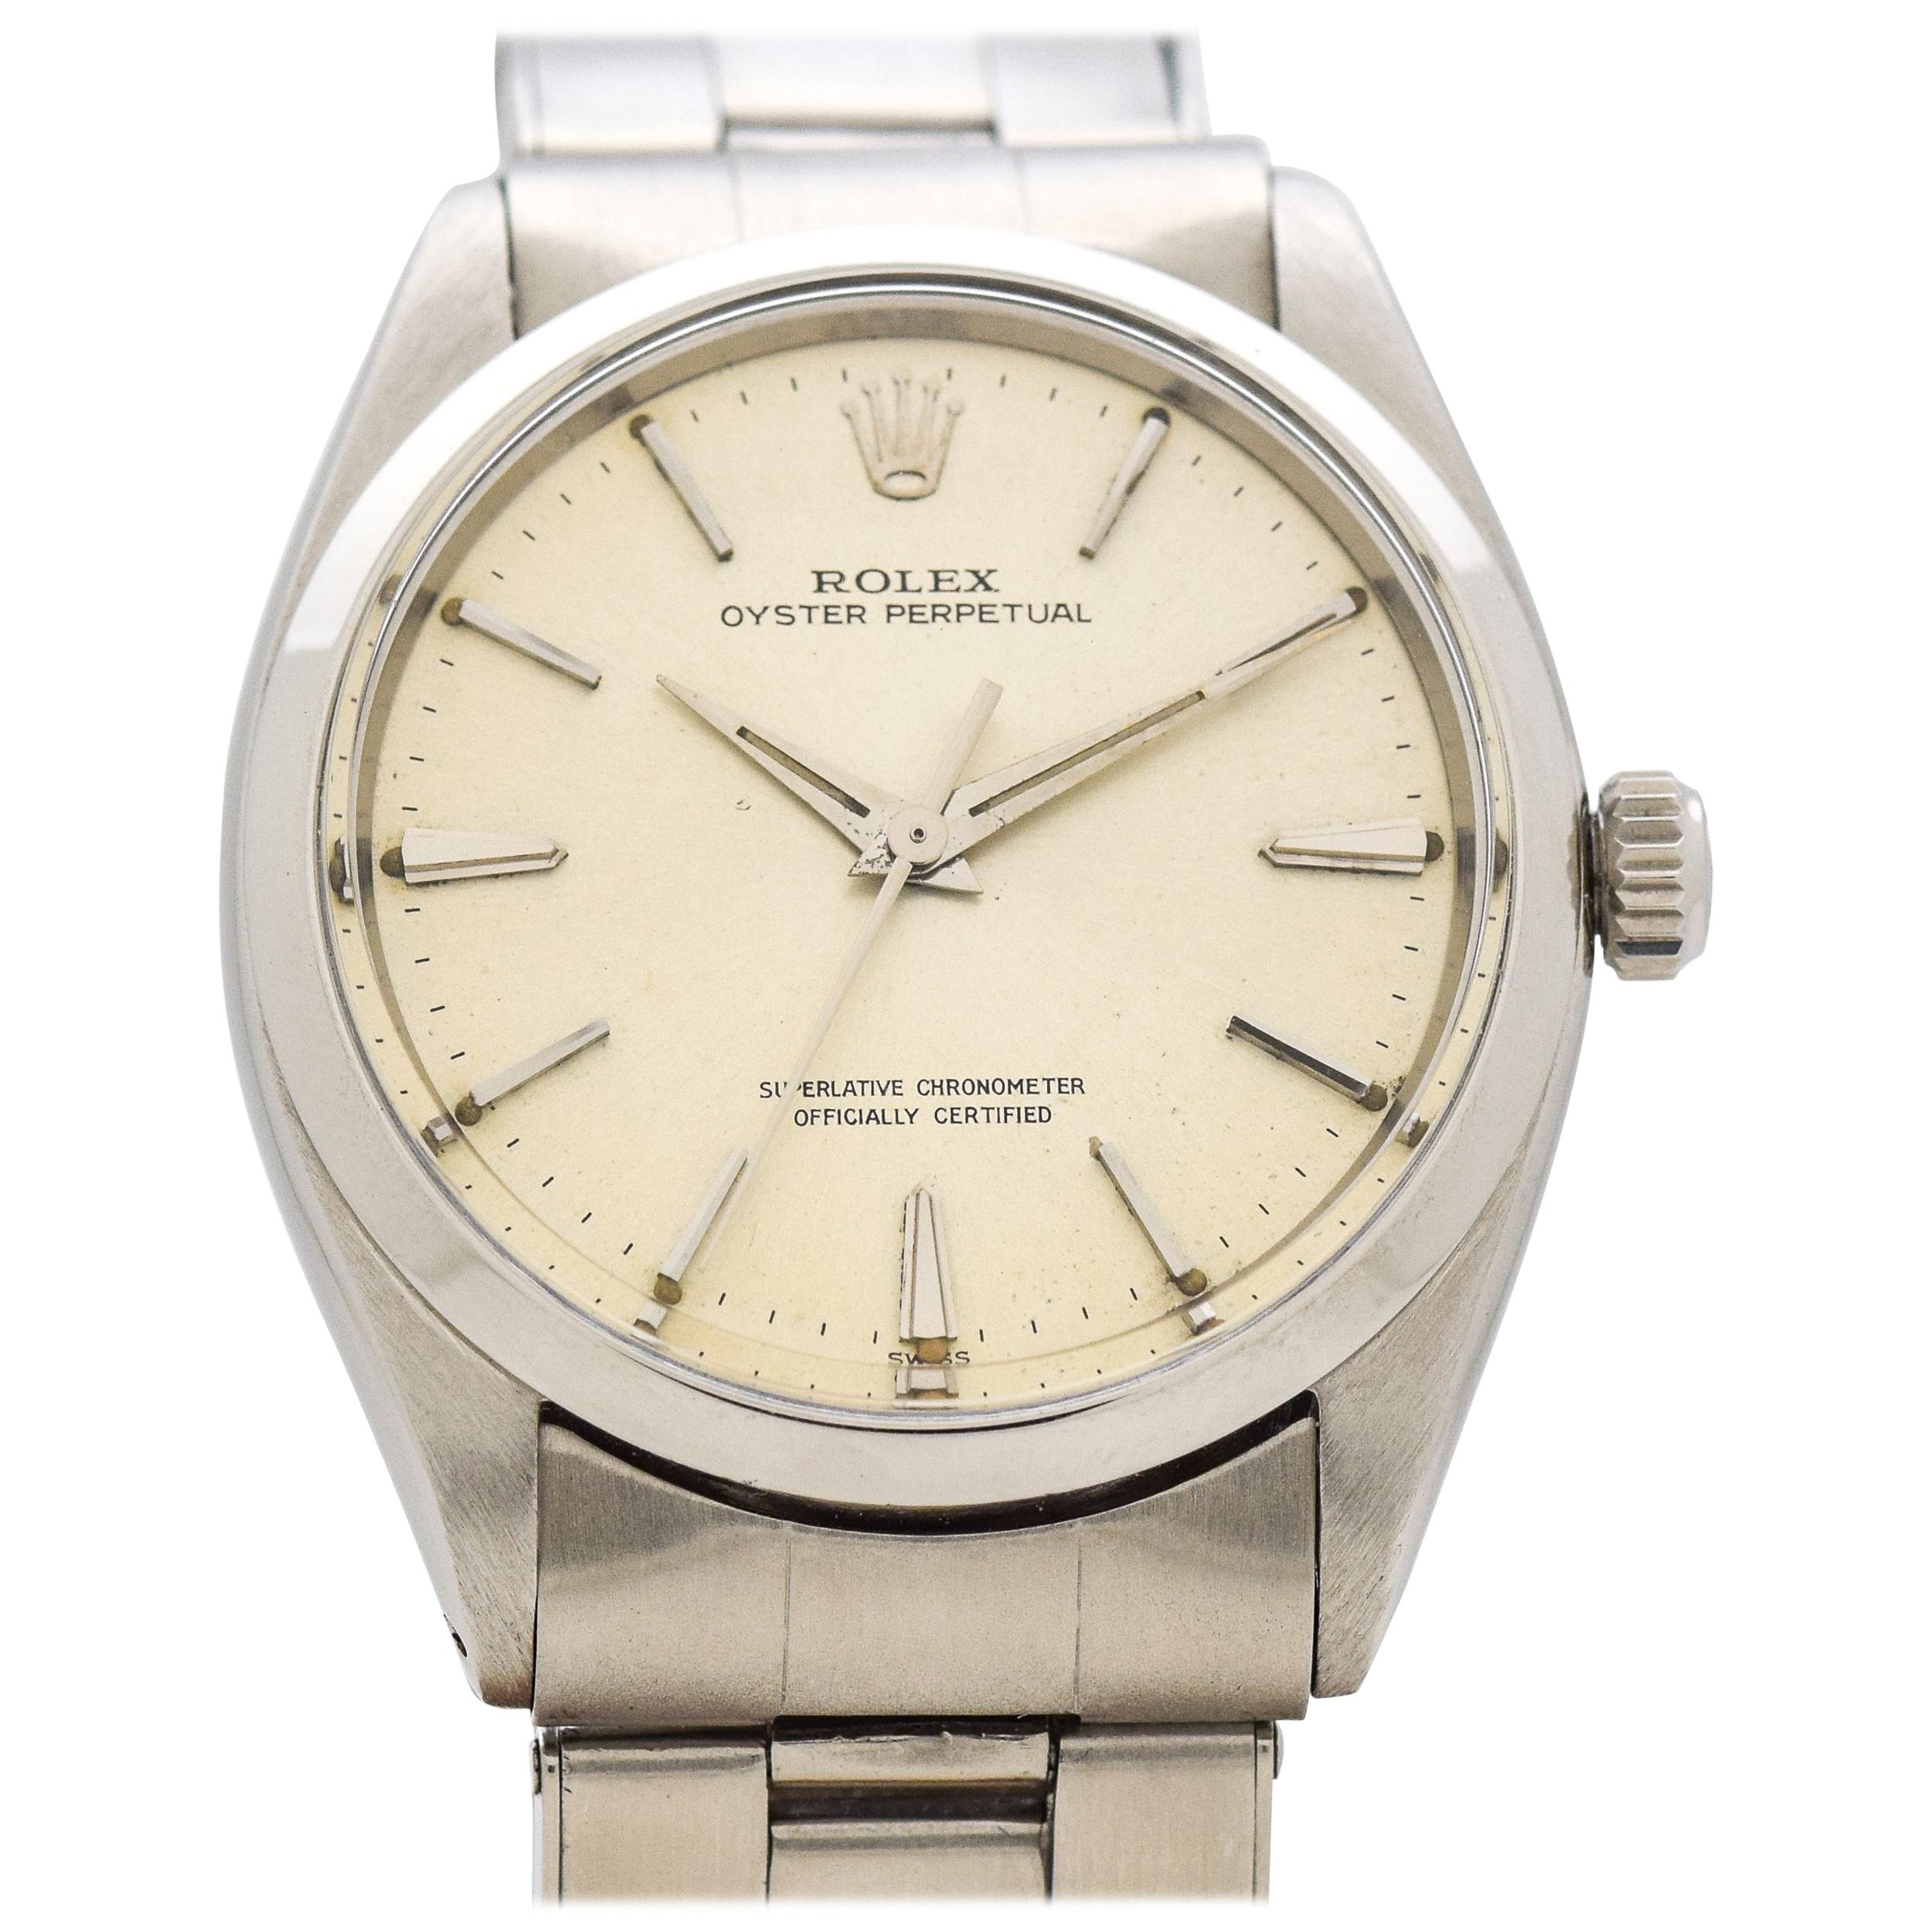 Vintage Rolex Oyster Perpetual Reference 1002 Stainless Steel Watch, 1963